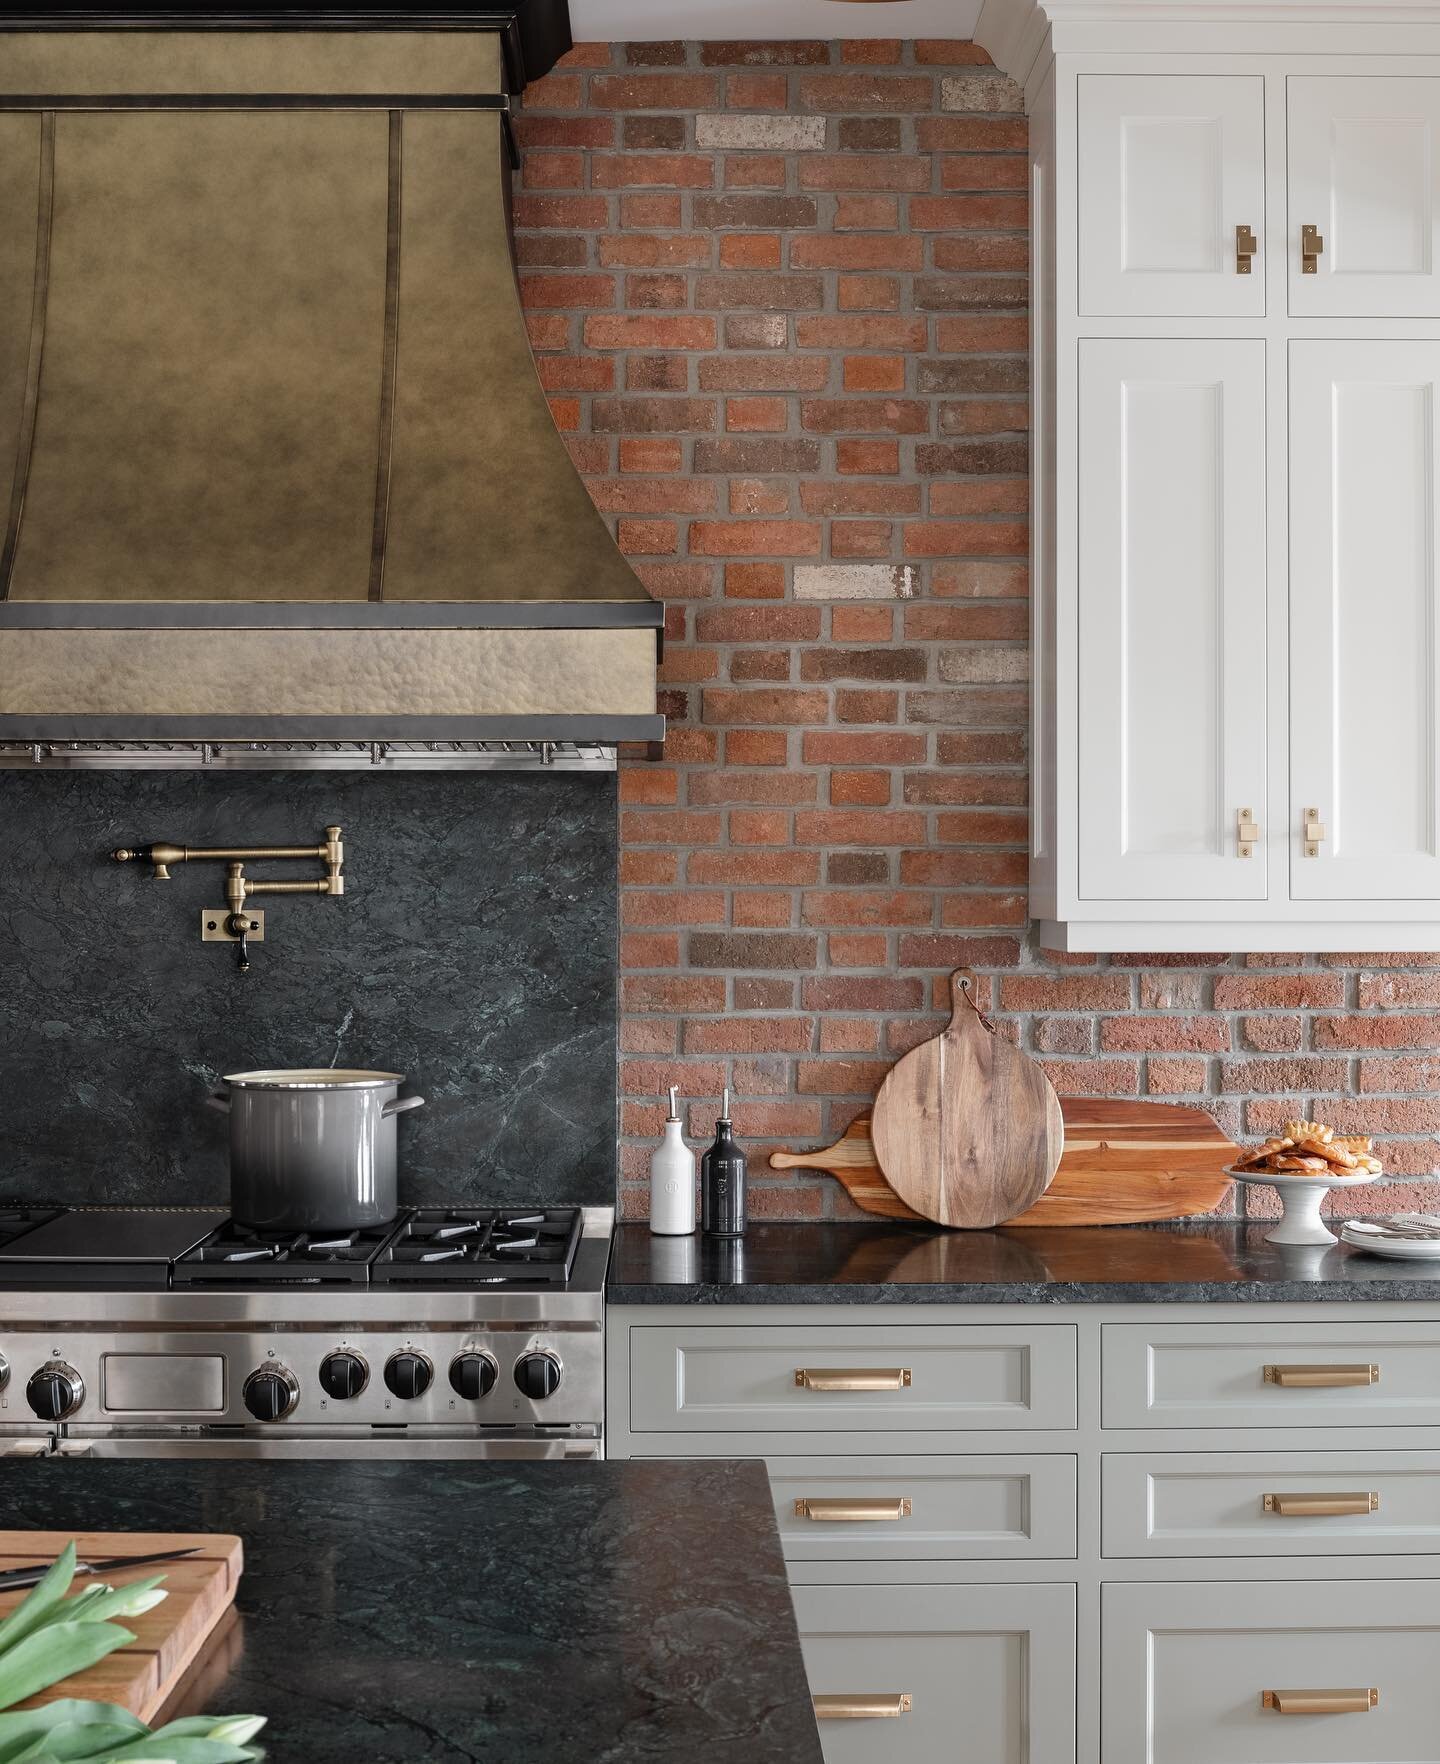 Ok last #elbowparkreno kitchen shot... we promise! (maybe). But who doesn&rsquo;t love a good close up? 

This kitchen carries a beautiful bold presence in this 1912 home.. With brass features, two-toned cabinetry, brick, and striking hardware, it ex